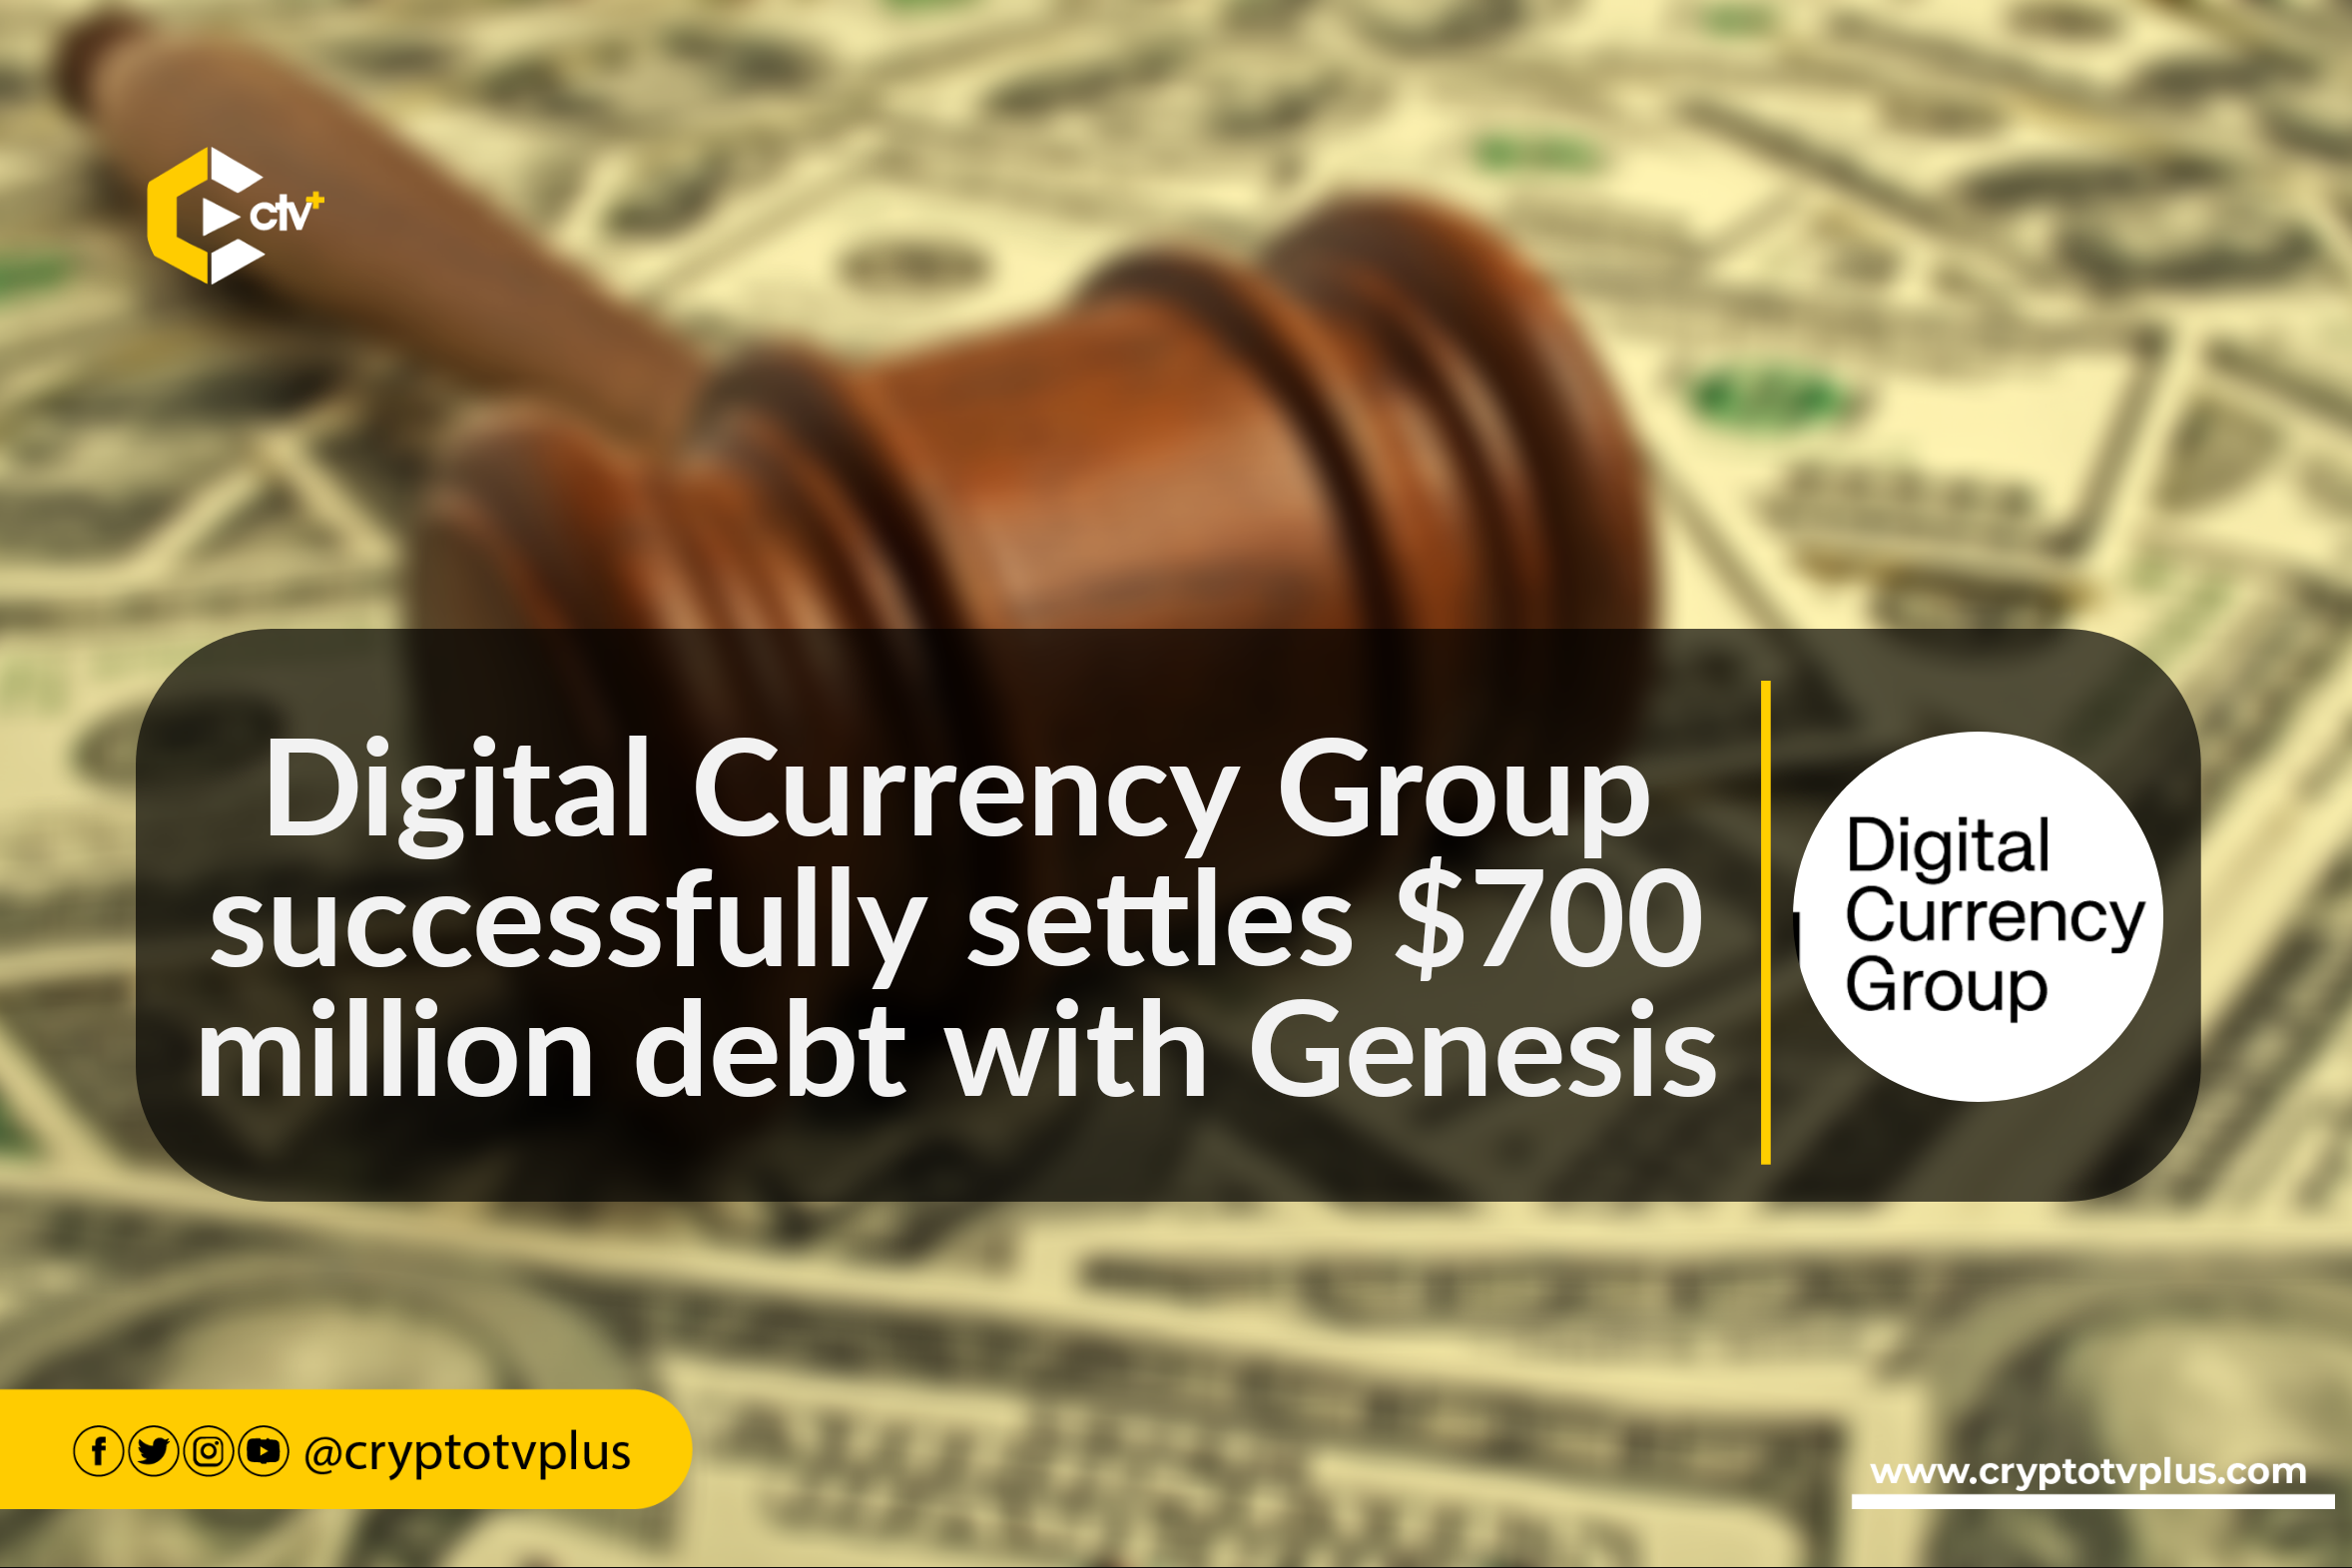 Digital Currency Group (DCG) fulfils financial commitments with a $700 million settlement on short-term loans with Genesis.